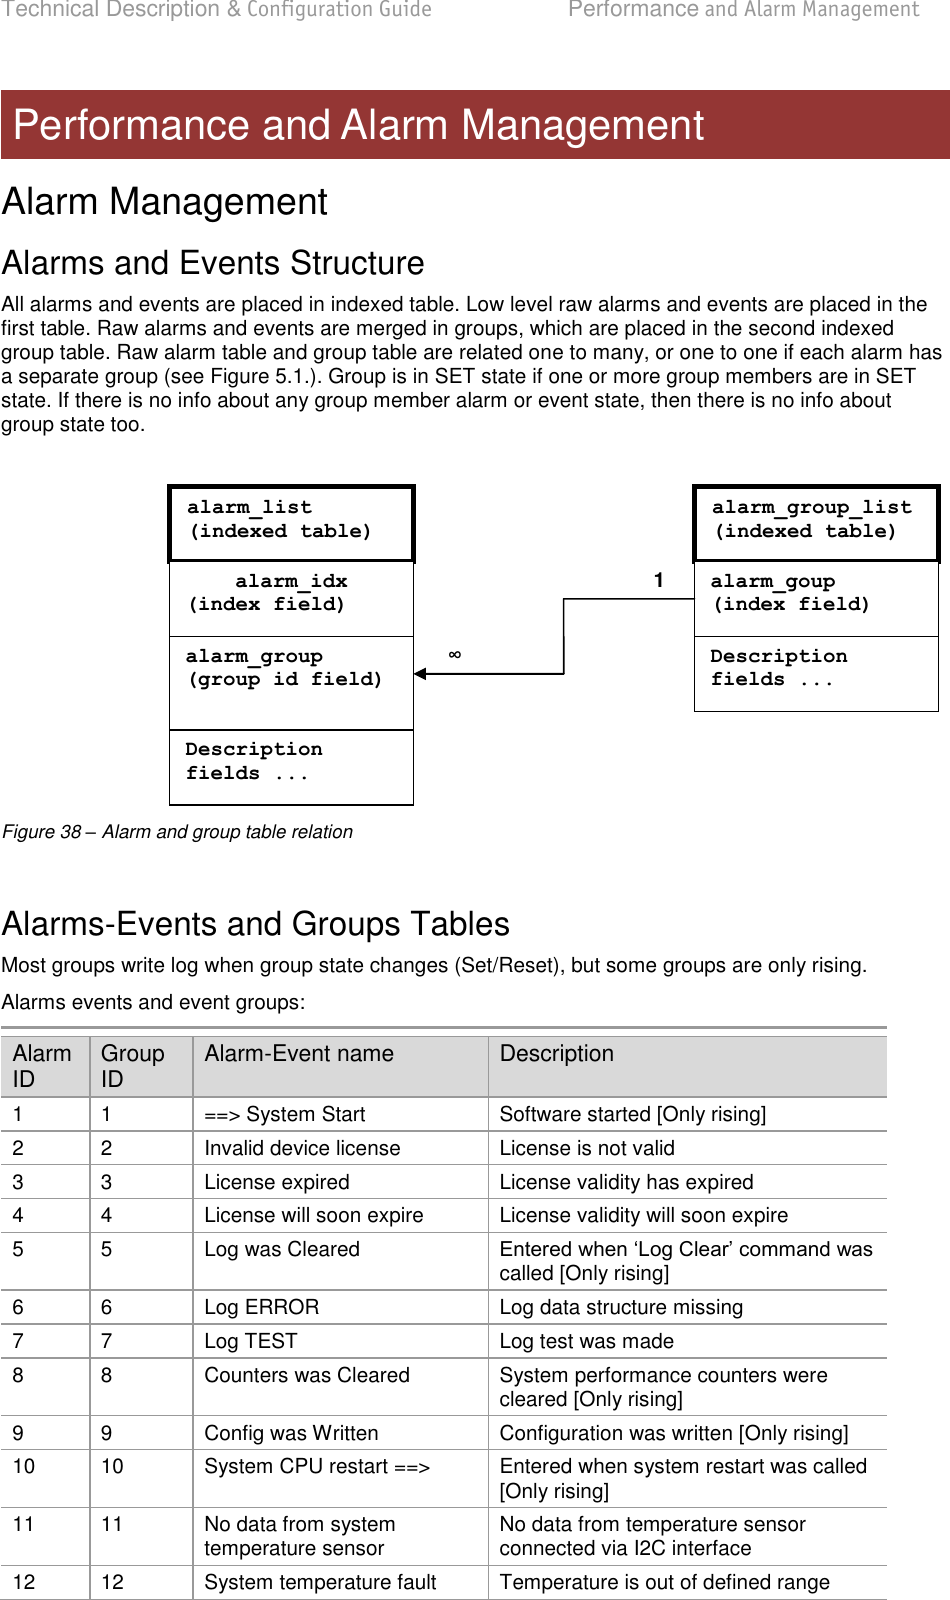 Technical Description &amp; Configuration Guide  Performance and Alarm Management  LigoWave  Page 59 Alarm Management Alarms and Events Structure All alarms and events are placed in indexed table. Low level raw alarms and events are placed in the first table. Raw alarms and events are merged in groups, which are placed in the second indexed group table. Raw alarm table and group table are related one to many, or one to one if each alarm has a separate group (see Figure 5.1.). Group is in SET state if one or more group members are in SET state. If there is no info about any group member alarm or event state, then there is no info about group state too.   Figure 38 – Alarm and group table relation  Alarms-Events and Groups Tables Most groups write log when group state changes (Set/Reset), but some groups are only rising. Alarms events and event groups: Alarm ID Group ID Alarm-Event name Description 1 1 ==&gt; System Start Software started [Only rising] 2 2 Invalid device license License is not valid 3 3 License expired License validity has expired 4 4 License will soon expire License validity will soon expire 5 5 Log was Cleared called [Only rising] 6 6 Log ERROR Log data structure missing 7 7 Log TEST Log test was made 8 8 Counters was Cleared System performance counters were cleared [Only rising] 9 9 Config was Written Configuration was written [Only rising] 10 10 System CPU restart ==&gt; Entered when system restart was called [Only rising] 11 11 No data from system temperature sensor No data from temperature sensor connected via I2C interface 12 12 System temperature fault Temperature is out of defined range  Performance and Alarm Management 1                                alarm_list (indexed table)                        alarm_idx (index field)                alarm_group (group id field)                        alarm_group_list (indexed table)                        alarm_goup (index field)                        ∞                                Description fields ...                                Description fields ...                                        